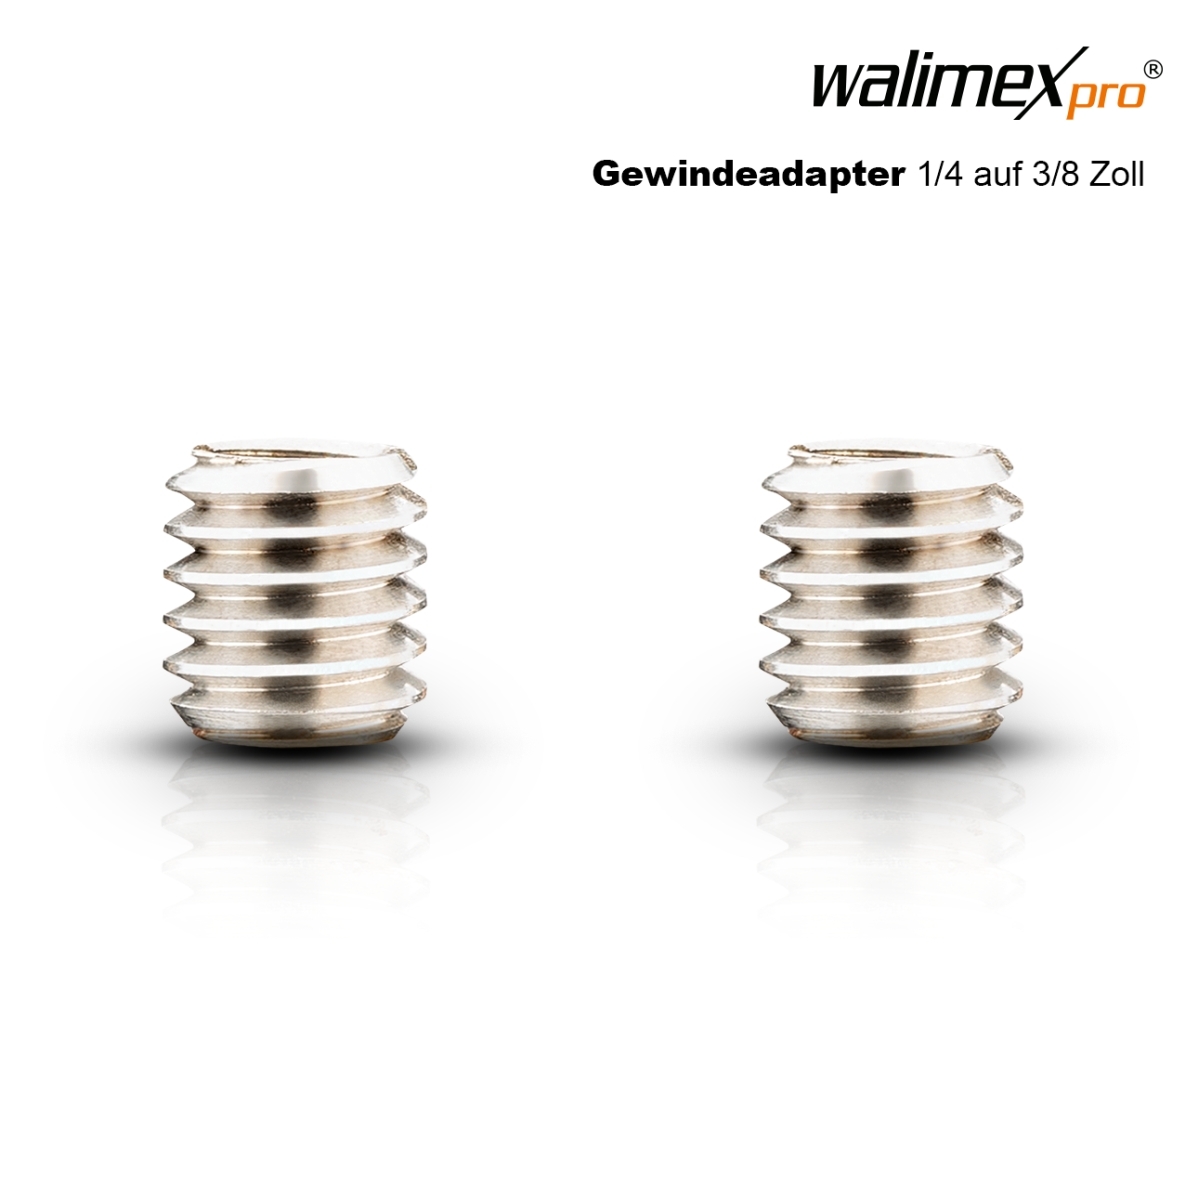 Walimex pro Adapter 1/4 inch to 3/8 inch, 2x